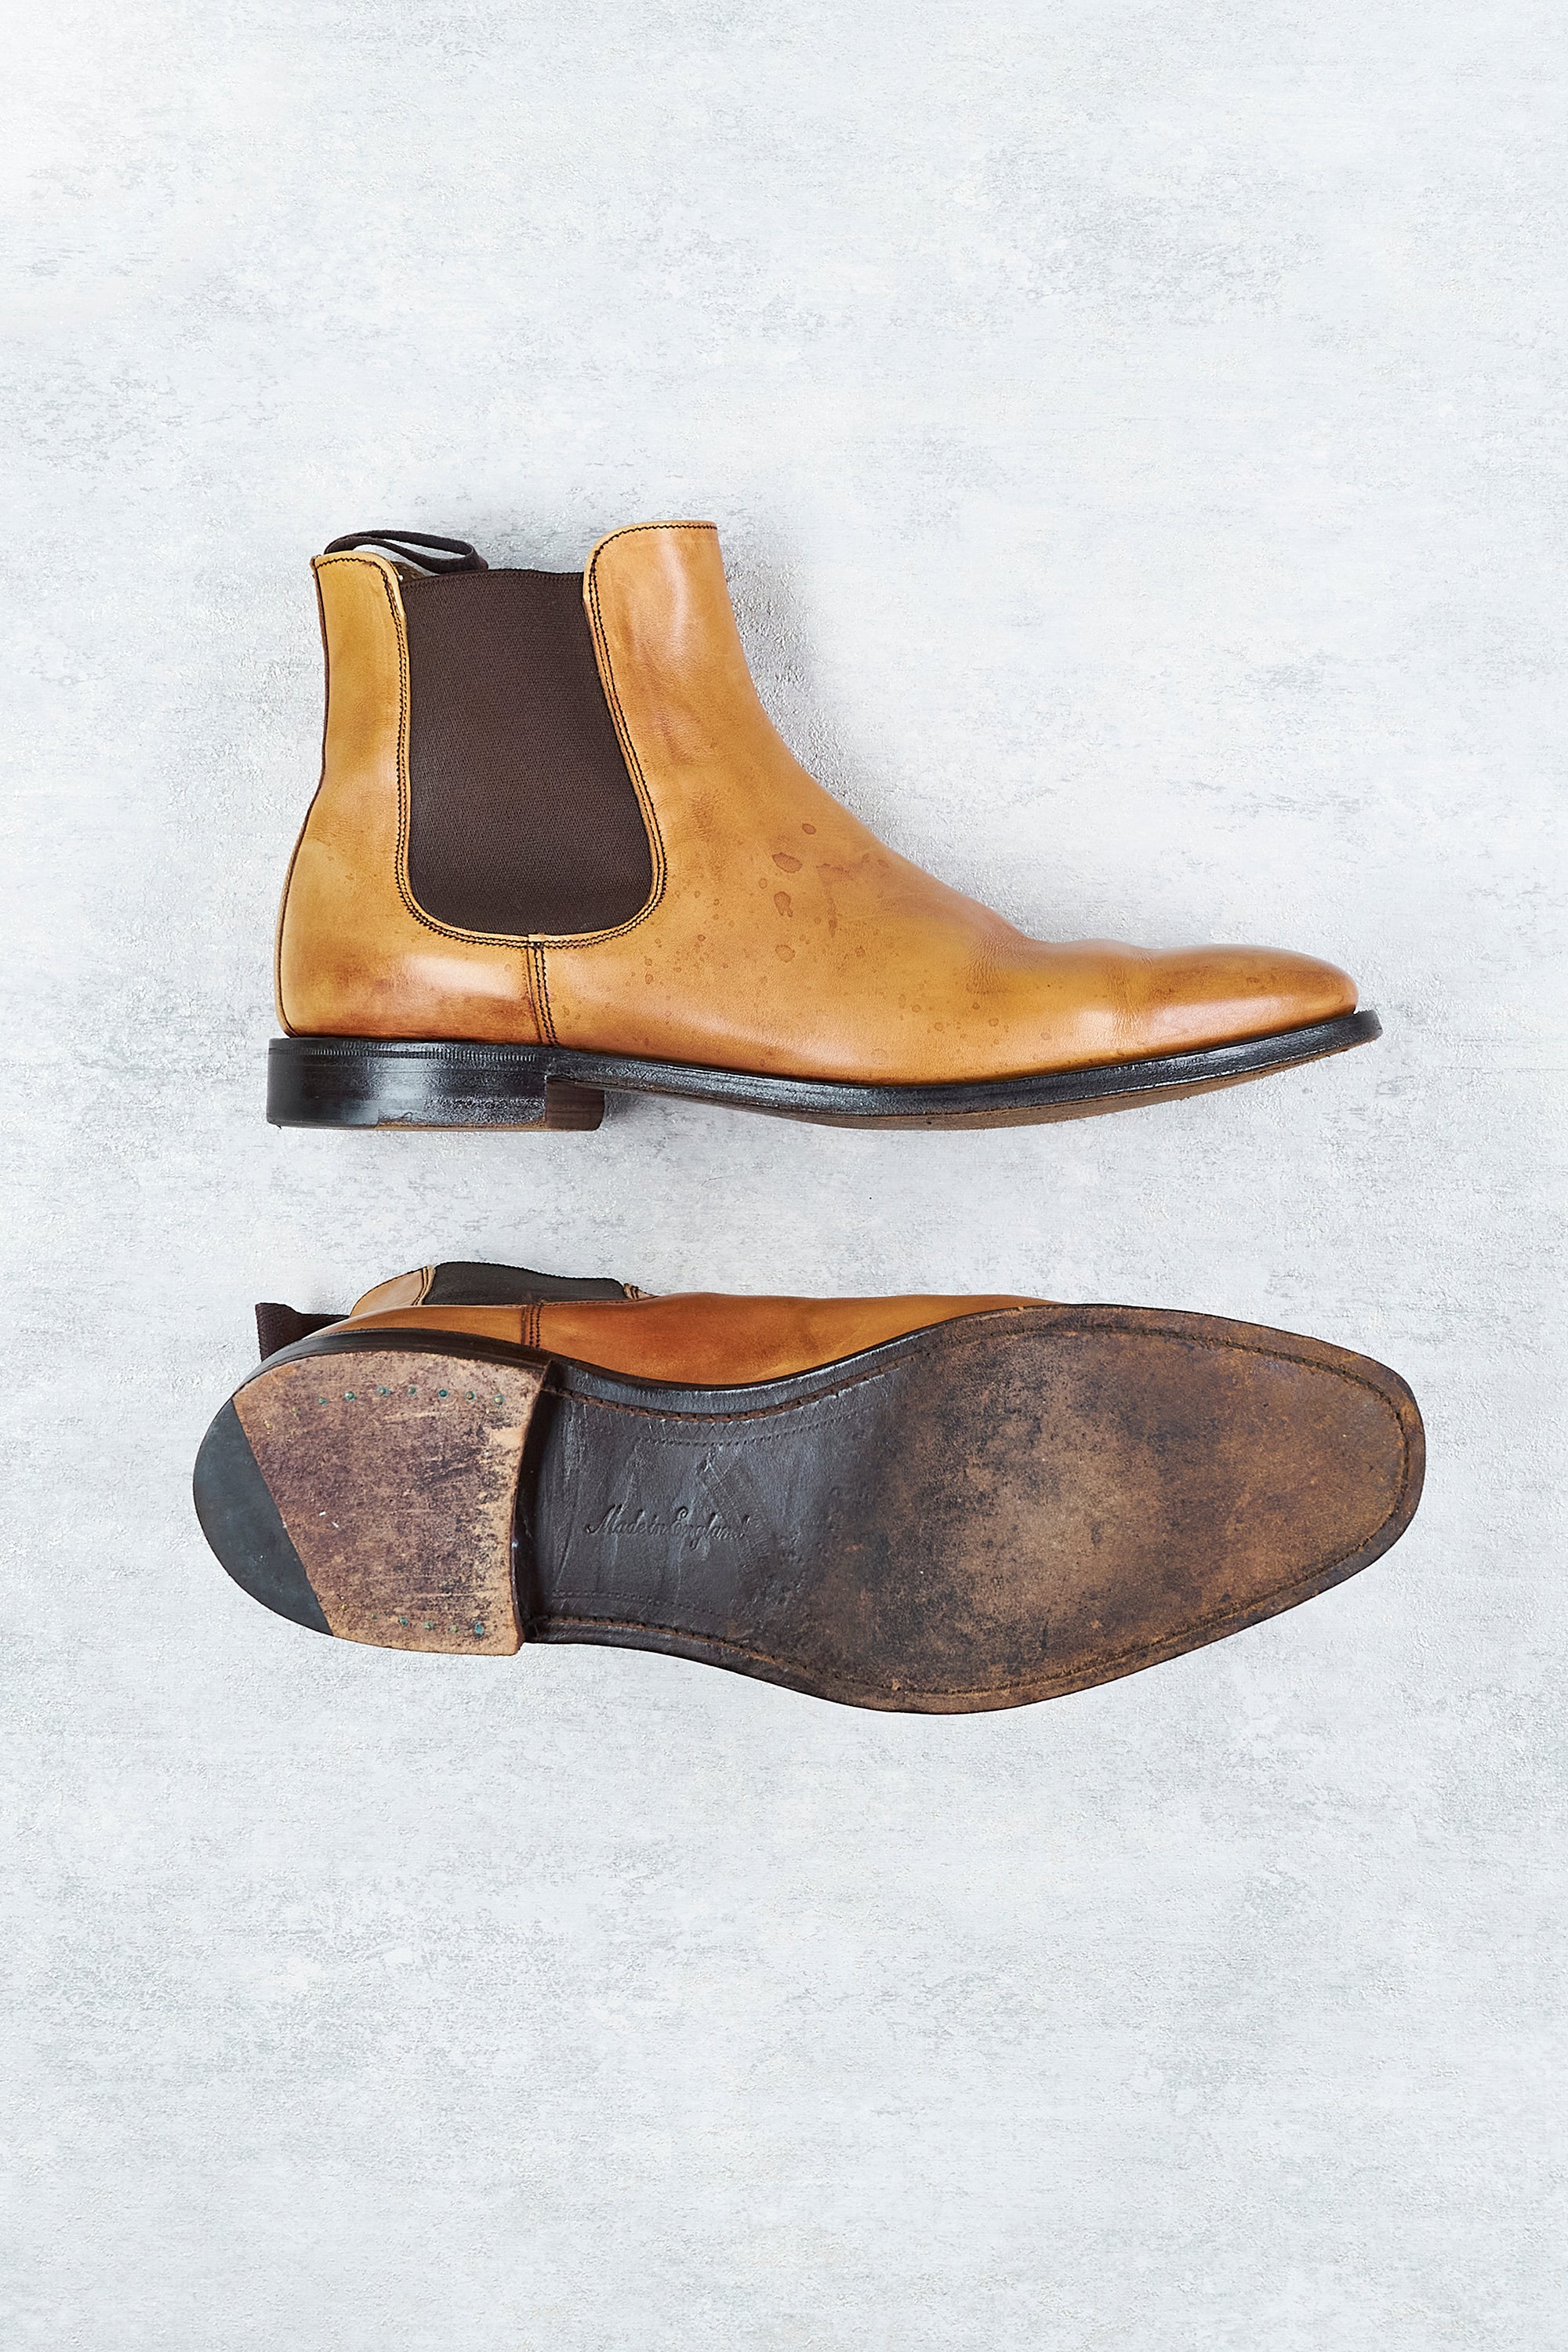 The Armoury Maple Calf Chelsea Boots